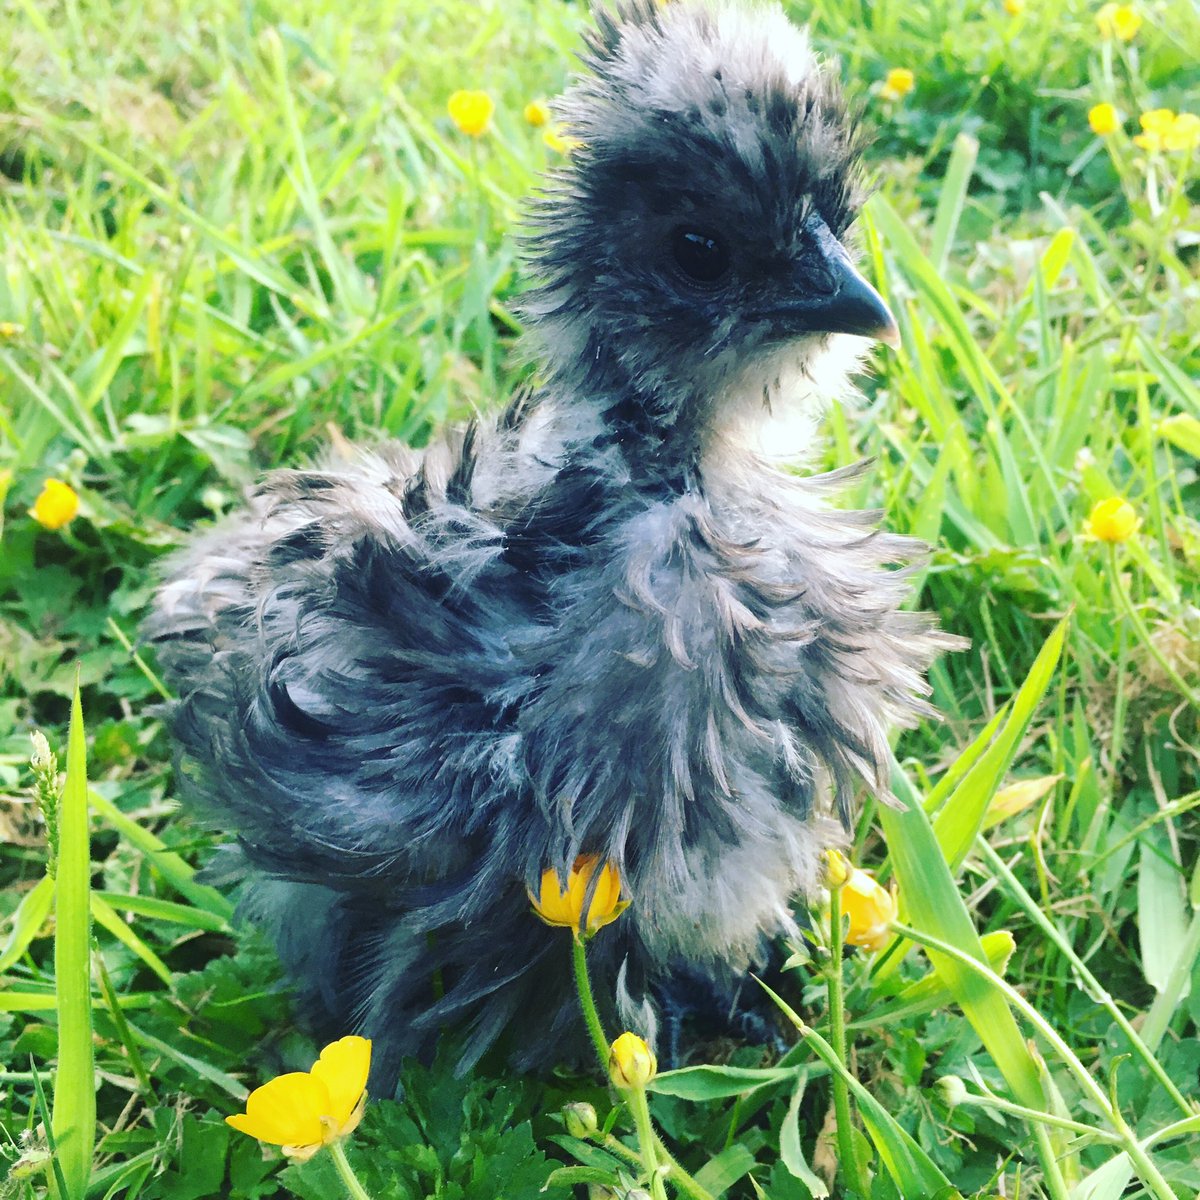 They grow soo fast! 
Geoffrey is becoming quite the Sizzle! 
😍😍😍 
.
.
.
.
#geofrey #sizzlechick #gardenchickens #petfectpets #pipinchickpoultry